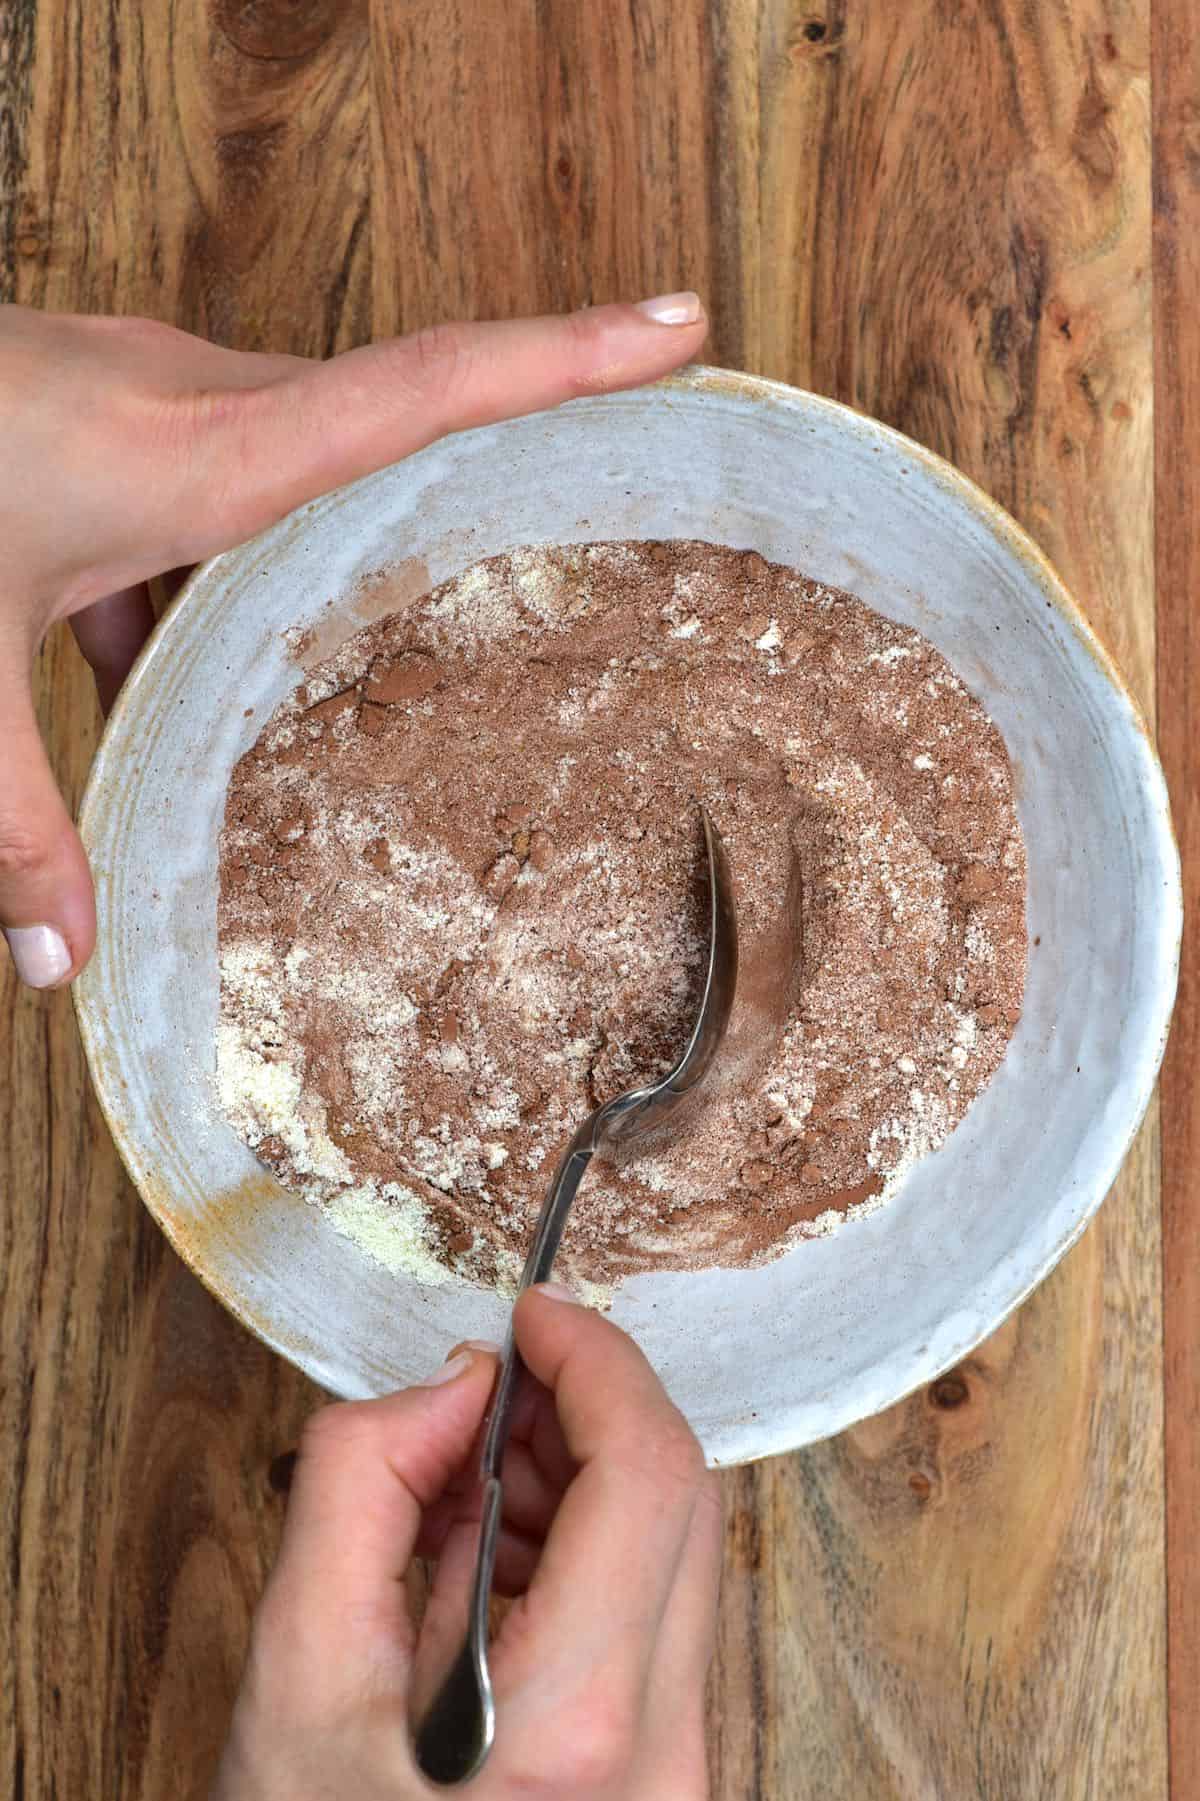 Mixing ingredients for hot chocolate mix in a bowl